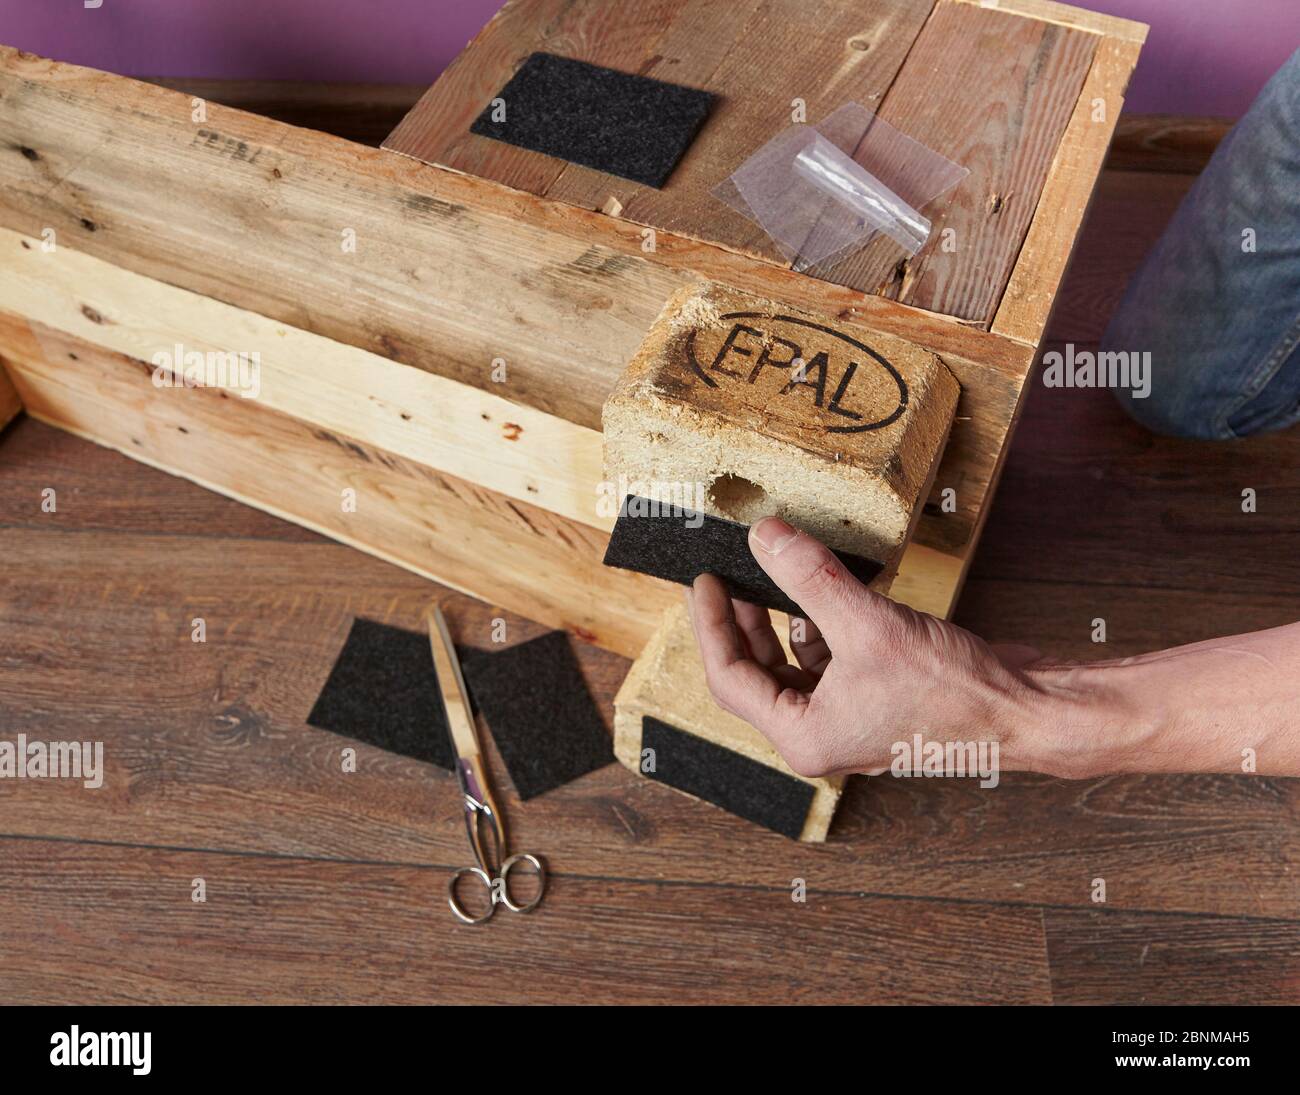 Construction of a shelf made of wood, Euro pallet, solid wood, MDF board; Do-it-yourself production, step-by-step, step 18, attaching self-adhesive felt panels under the furniture feet Stock Photo